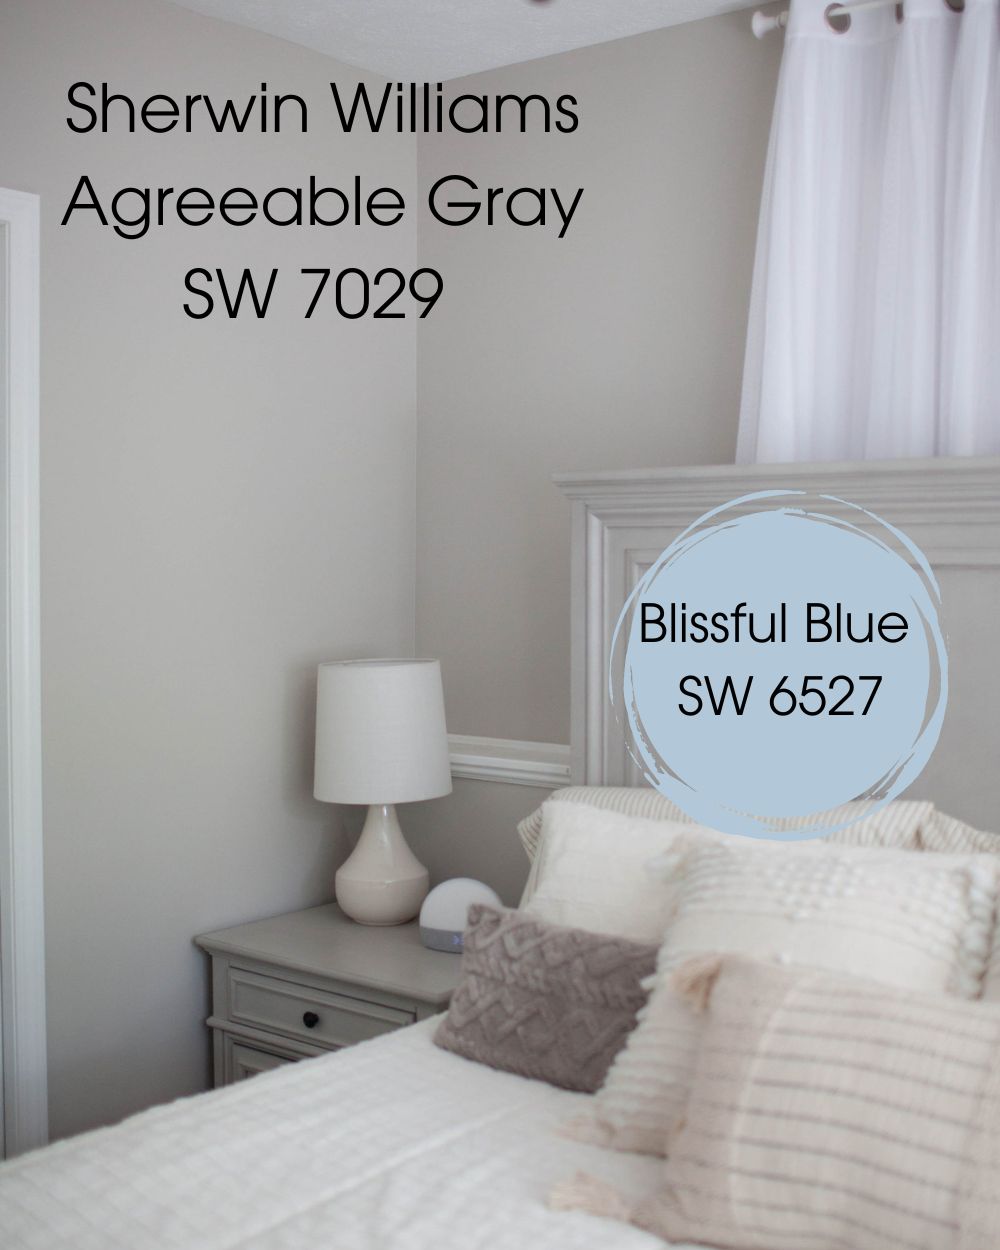 Copy of Agreeable Gray (SW 7029)